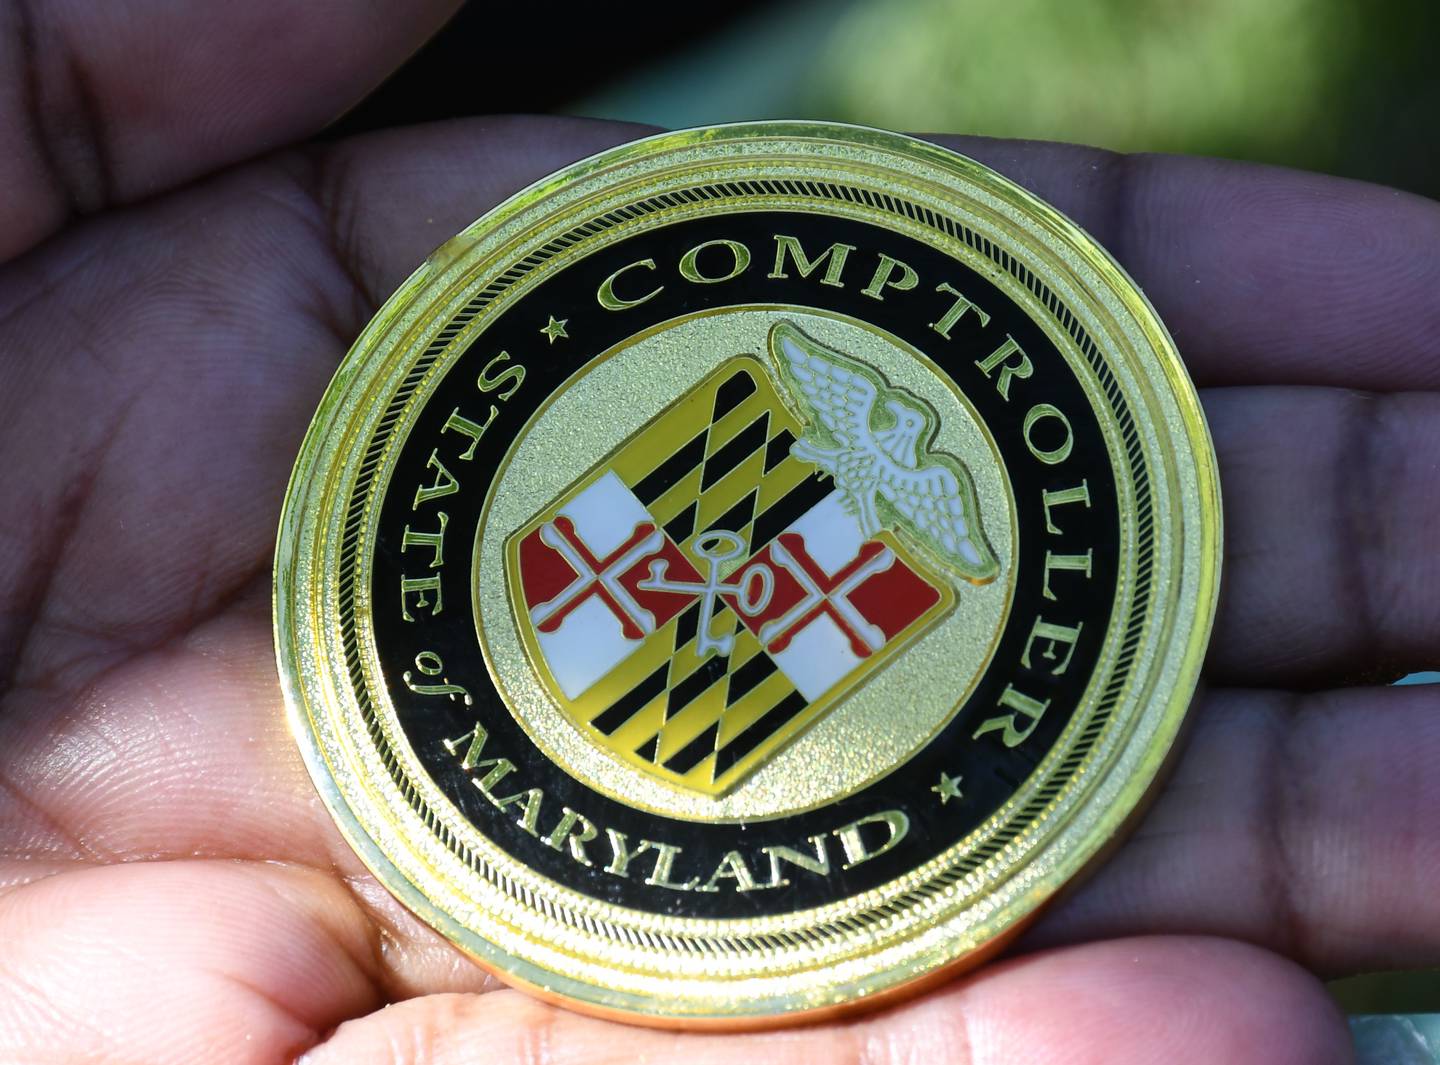 A woman holds a commemorative coin given to her by Maryland Comptroller Peter Franchot at Baltimore's AFRAM festival on June 19, 2022. Franchot, who is a Democratic candidate for governor, frequently hands out the coins, especially to people with military or law enforcement backgrounds. The other side says: "In Recognition of Excellence, Service, & Sacrifice" and carries Franchot's name and title.